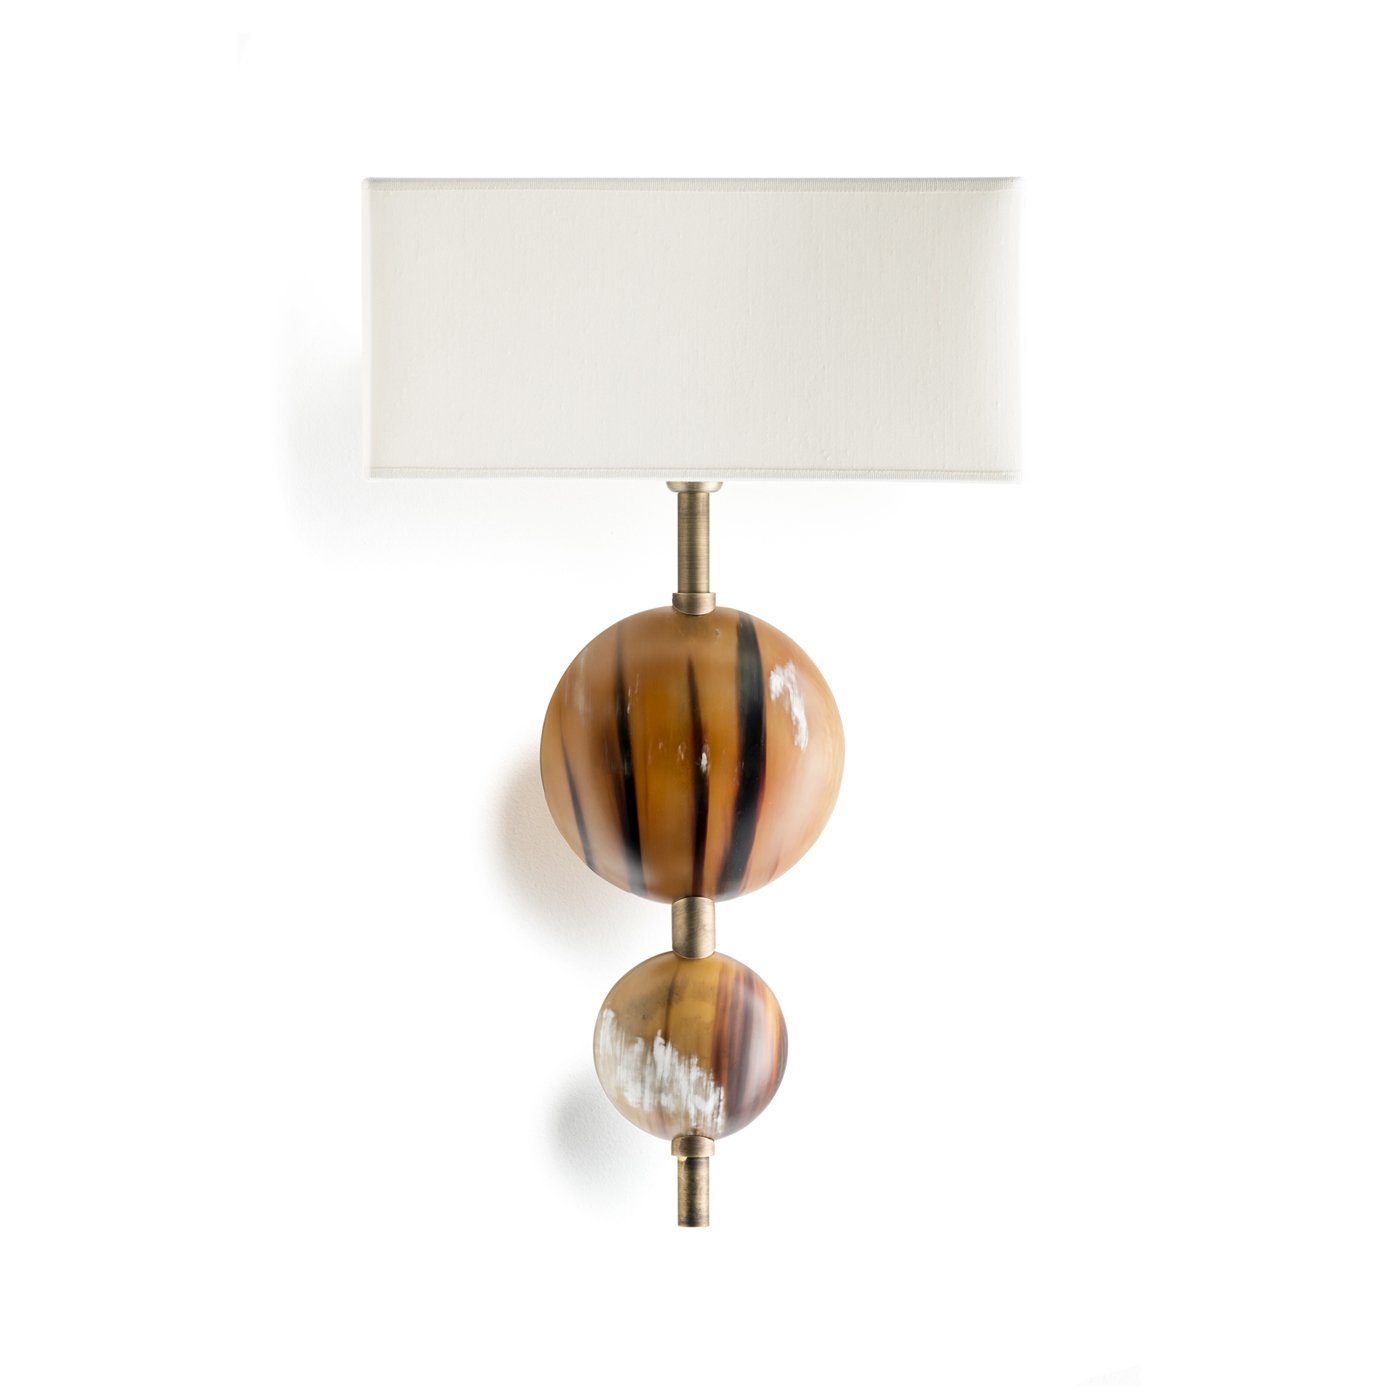 Lamps - Vittoria wall sconce in matte horn and burnished brass - frontal - Arcahorn